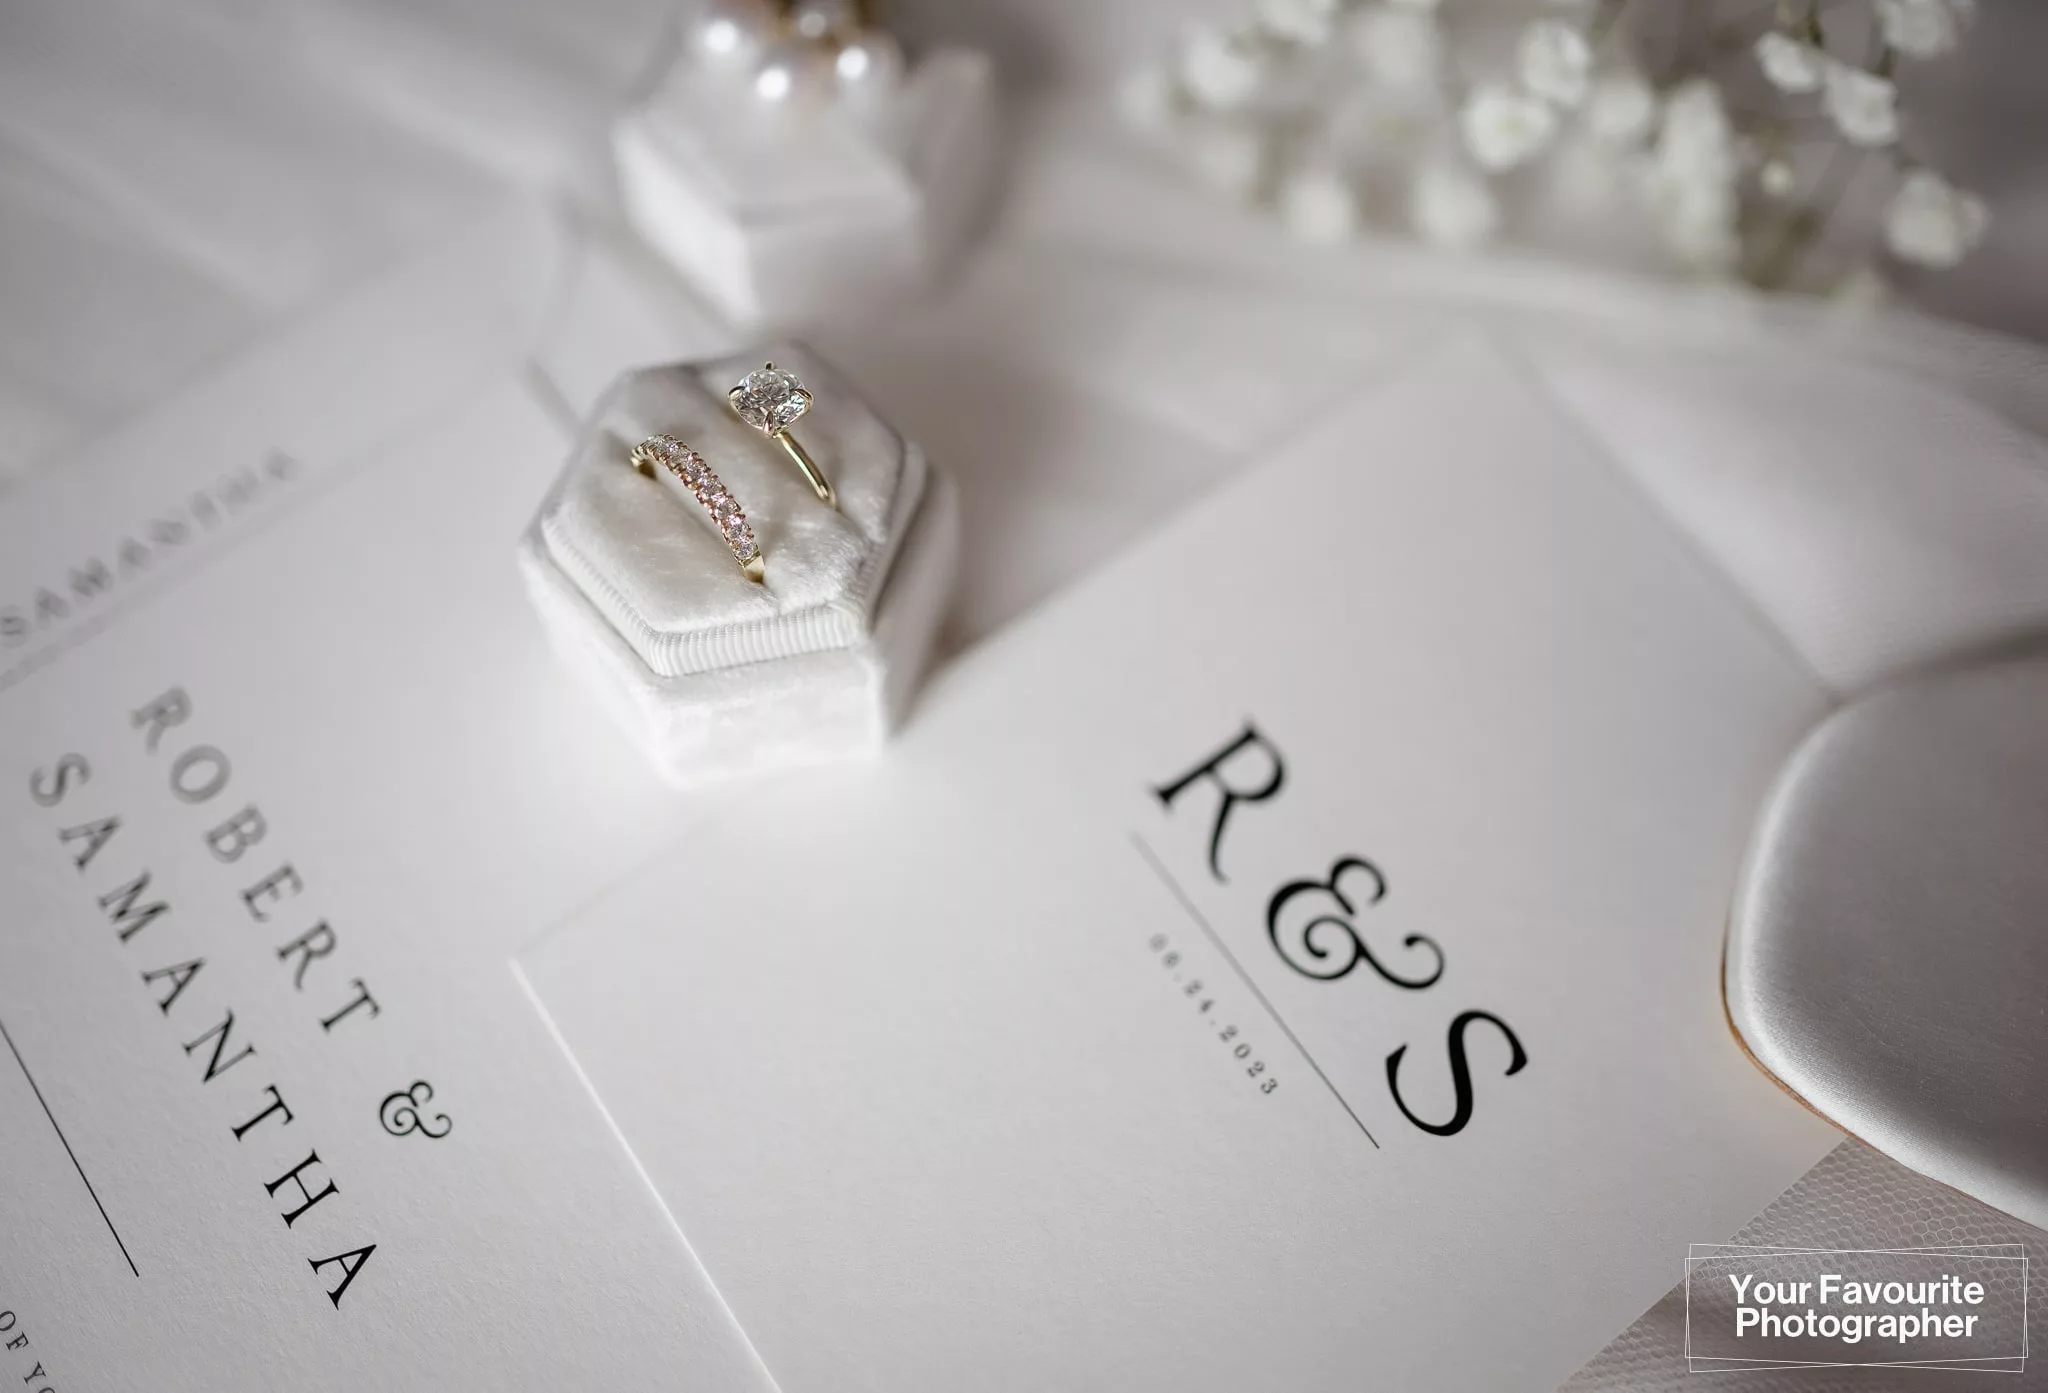 Close up of wedding rings on a wedding invitation